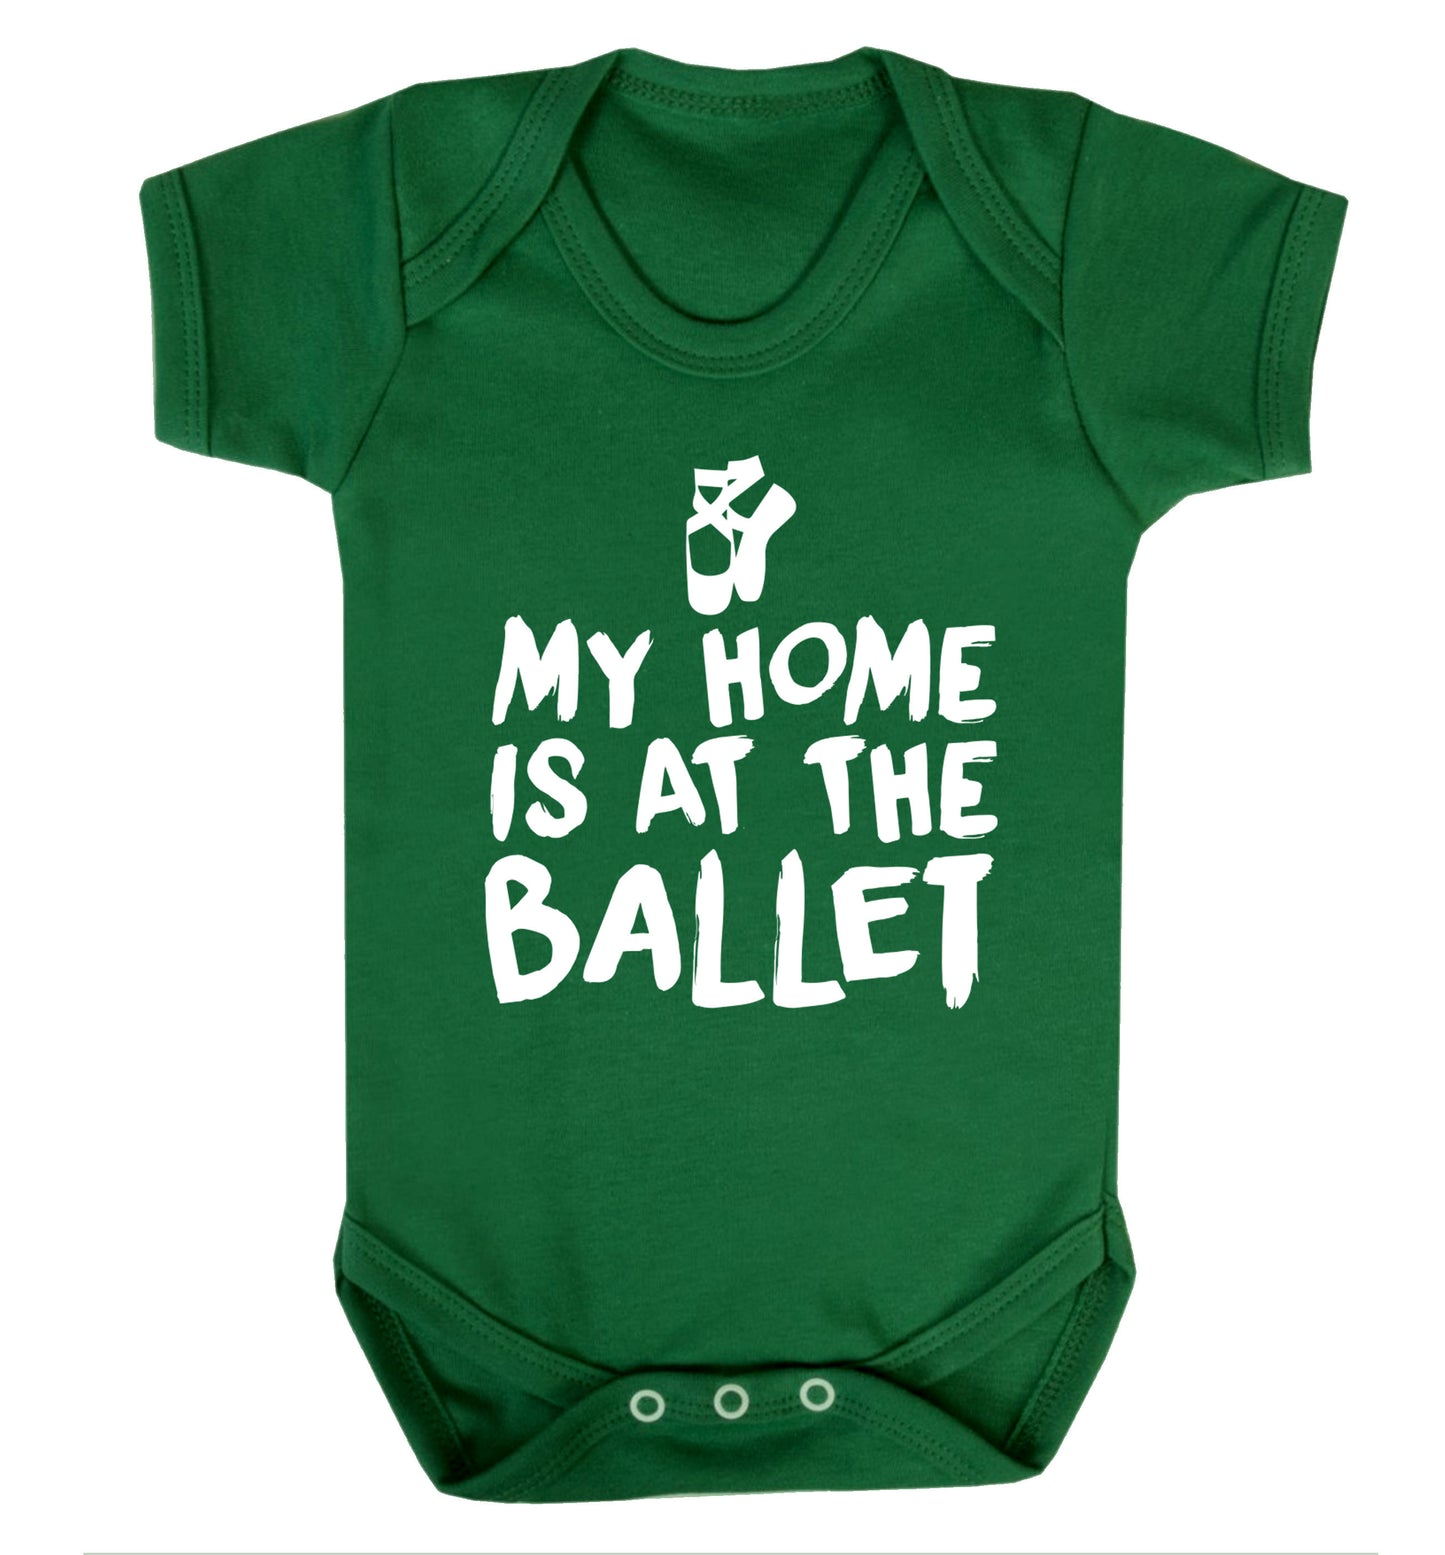 My home is at the dance studio Baby Vest green 18-24 months